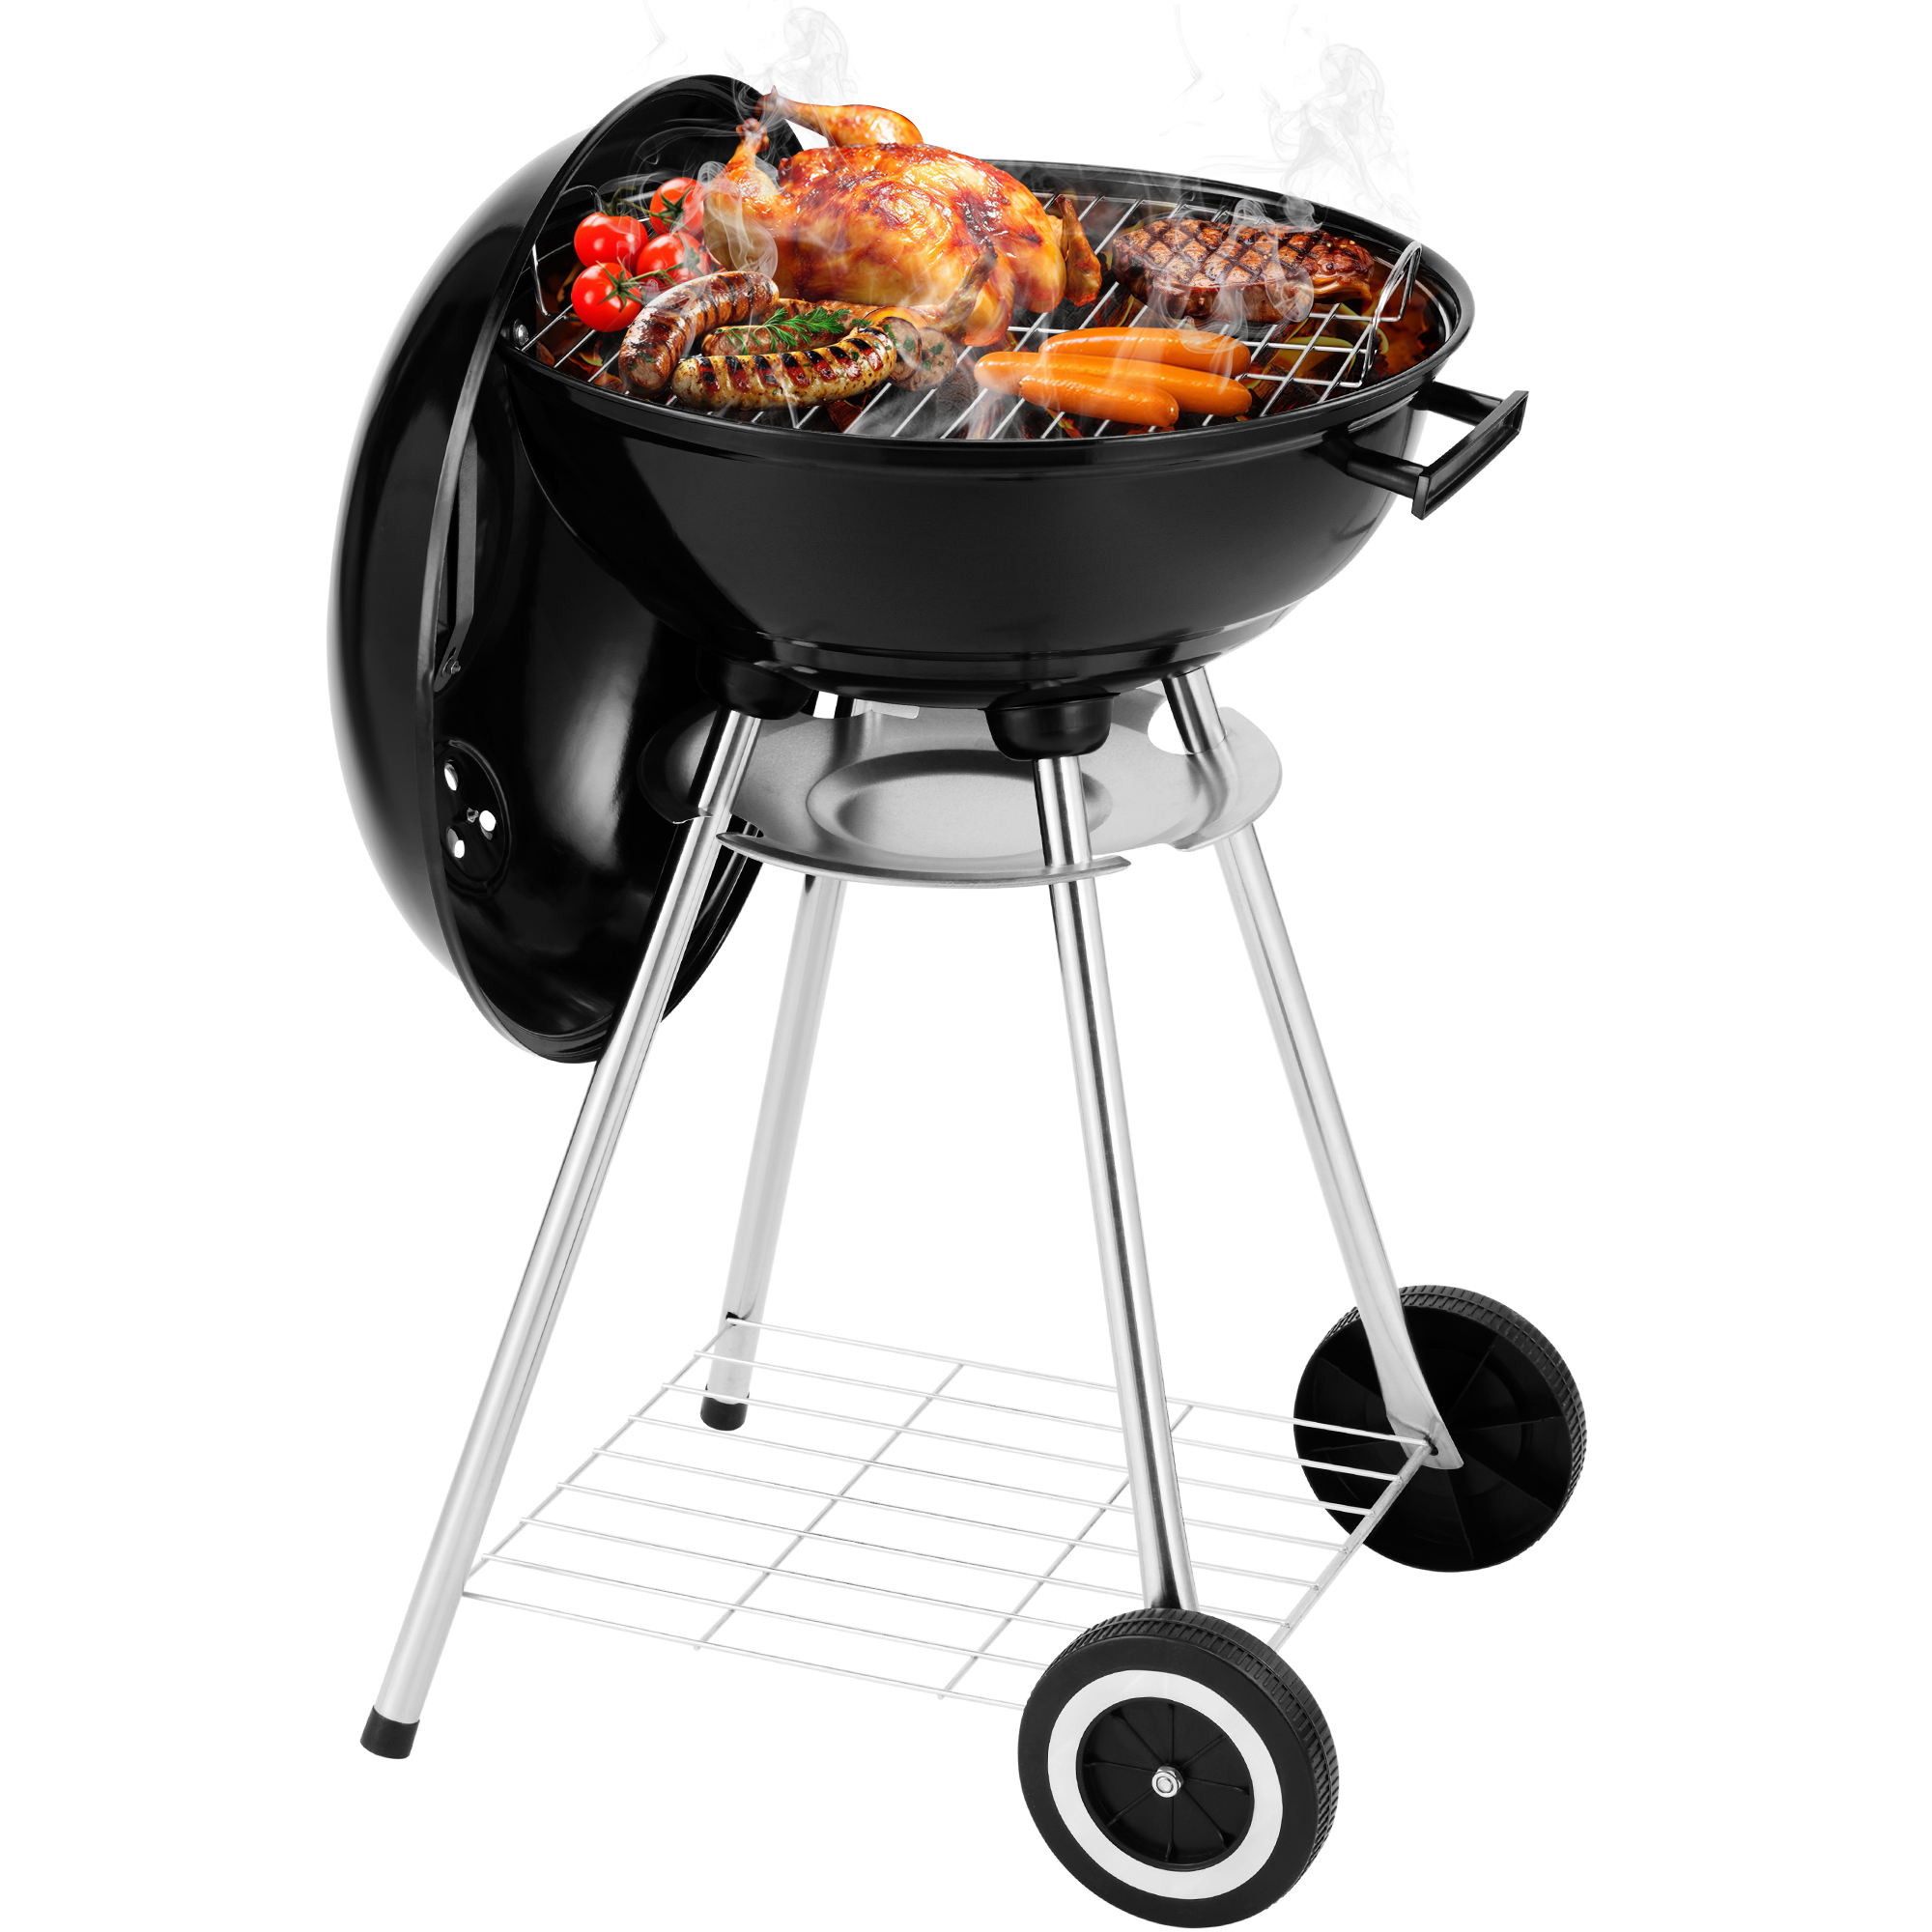 Segmart Kettle Charcoal Grill, 18 Inch Portable Camping BBQ Grill with Wheels for Outdoor Cooking Picnic Barbecue, Black - image 1 of 11